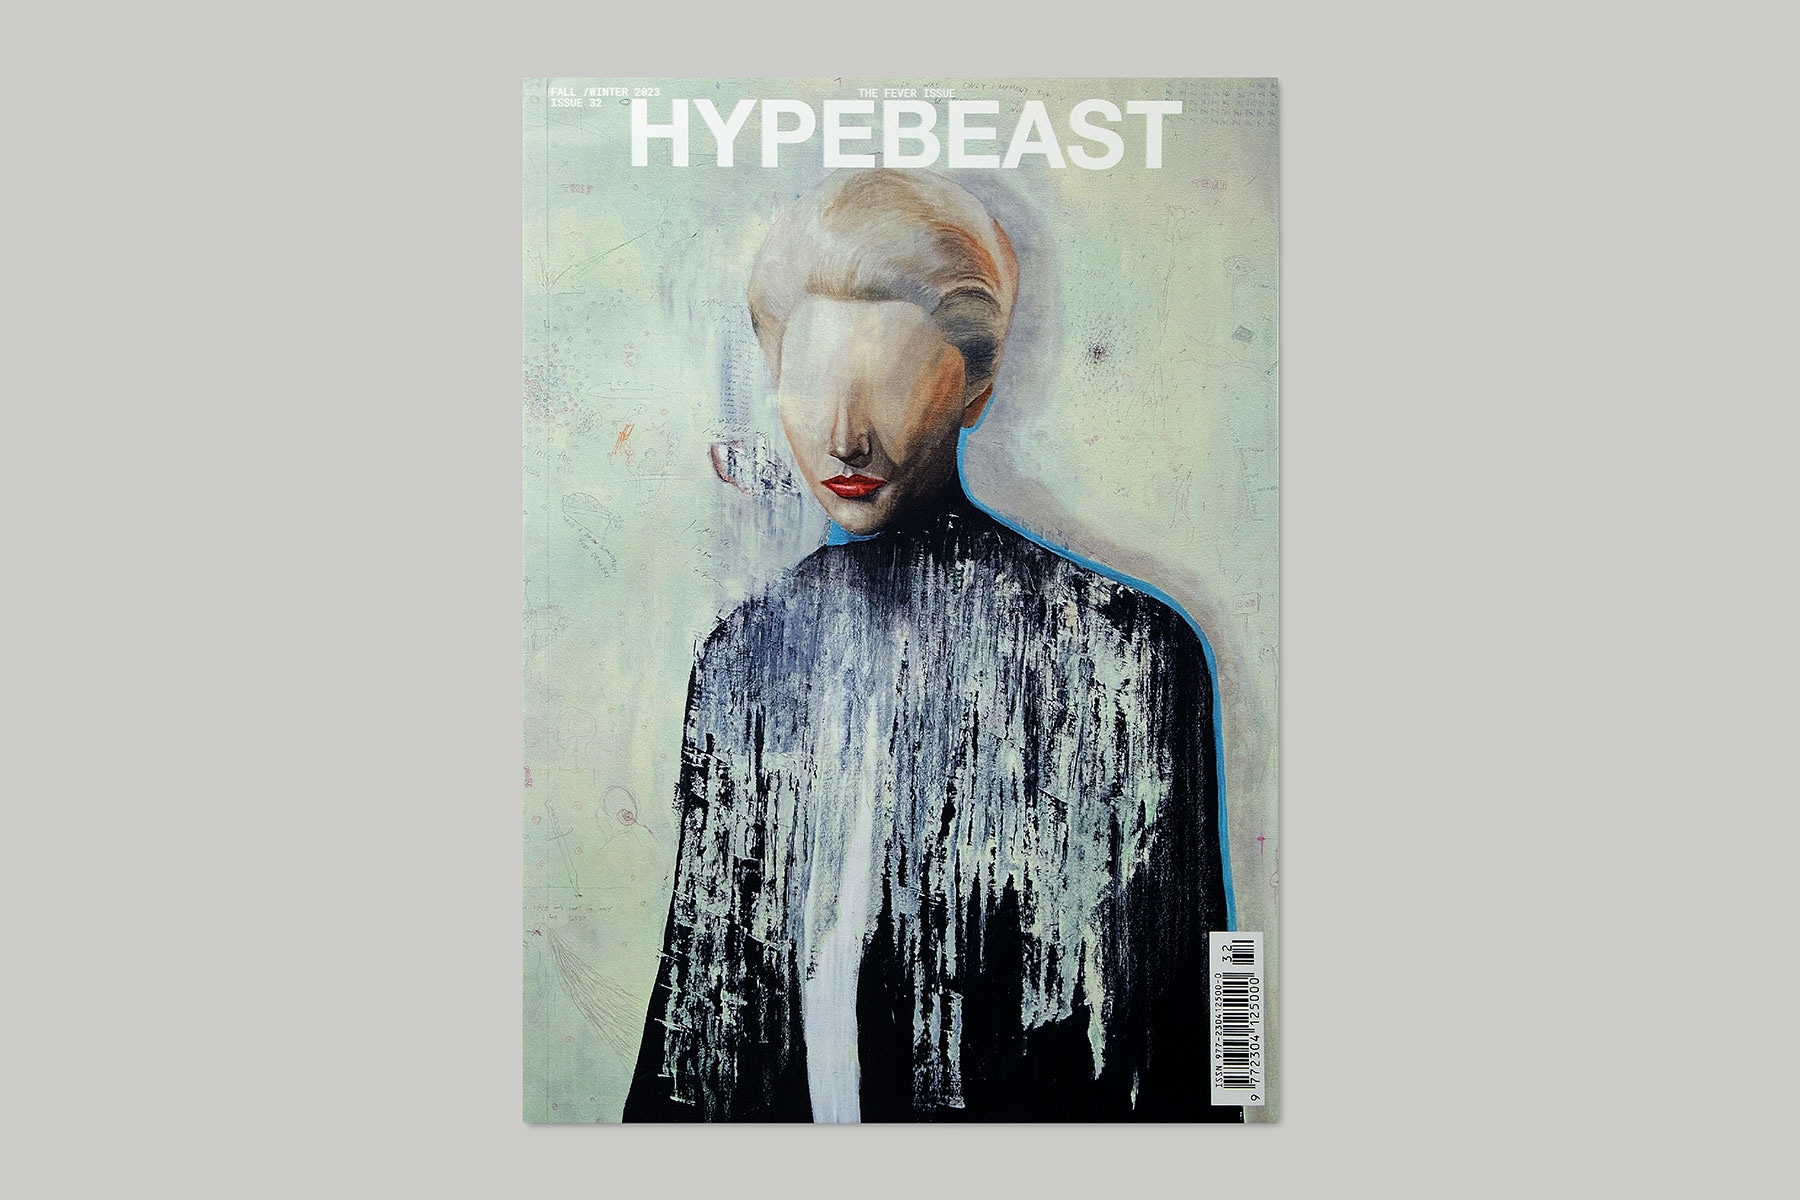 Hypebeast Magazine Issue 32: The Fever Issue